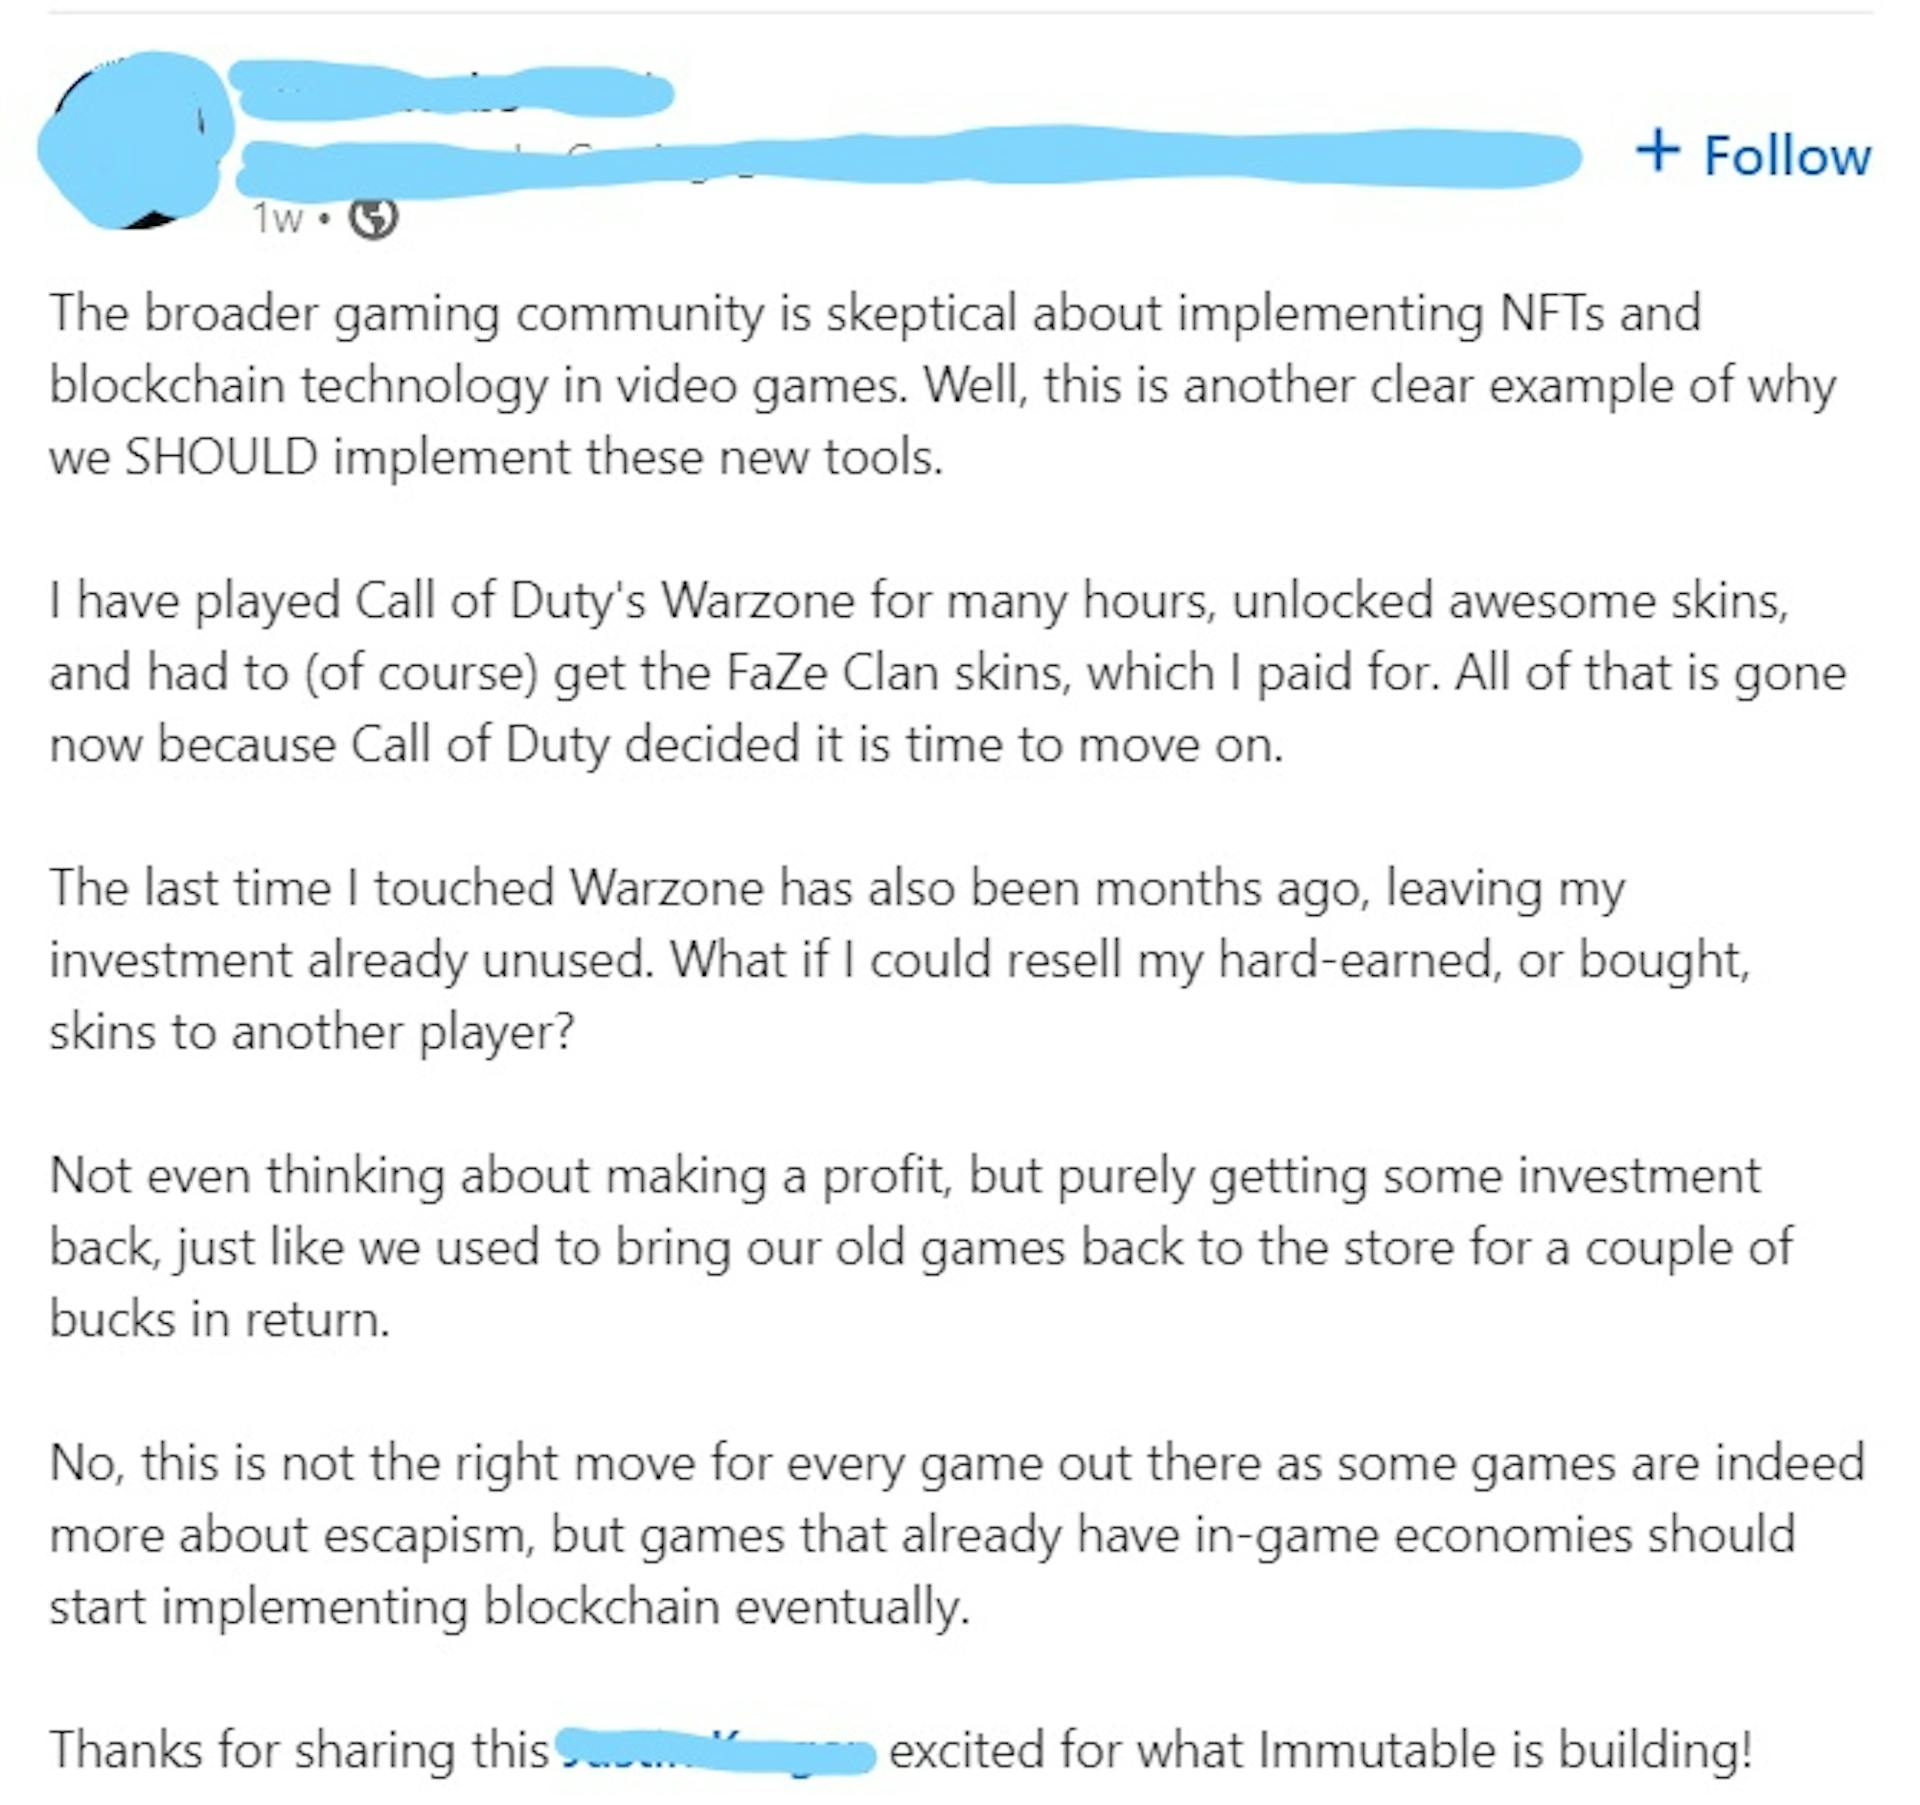 screenshot of LinkedIn post from a professional working in "Web3" who is also a gamer